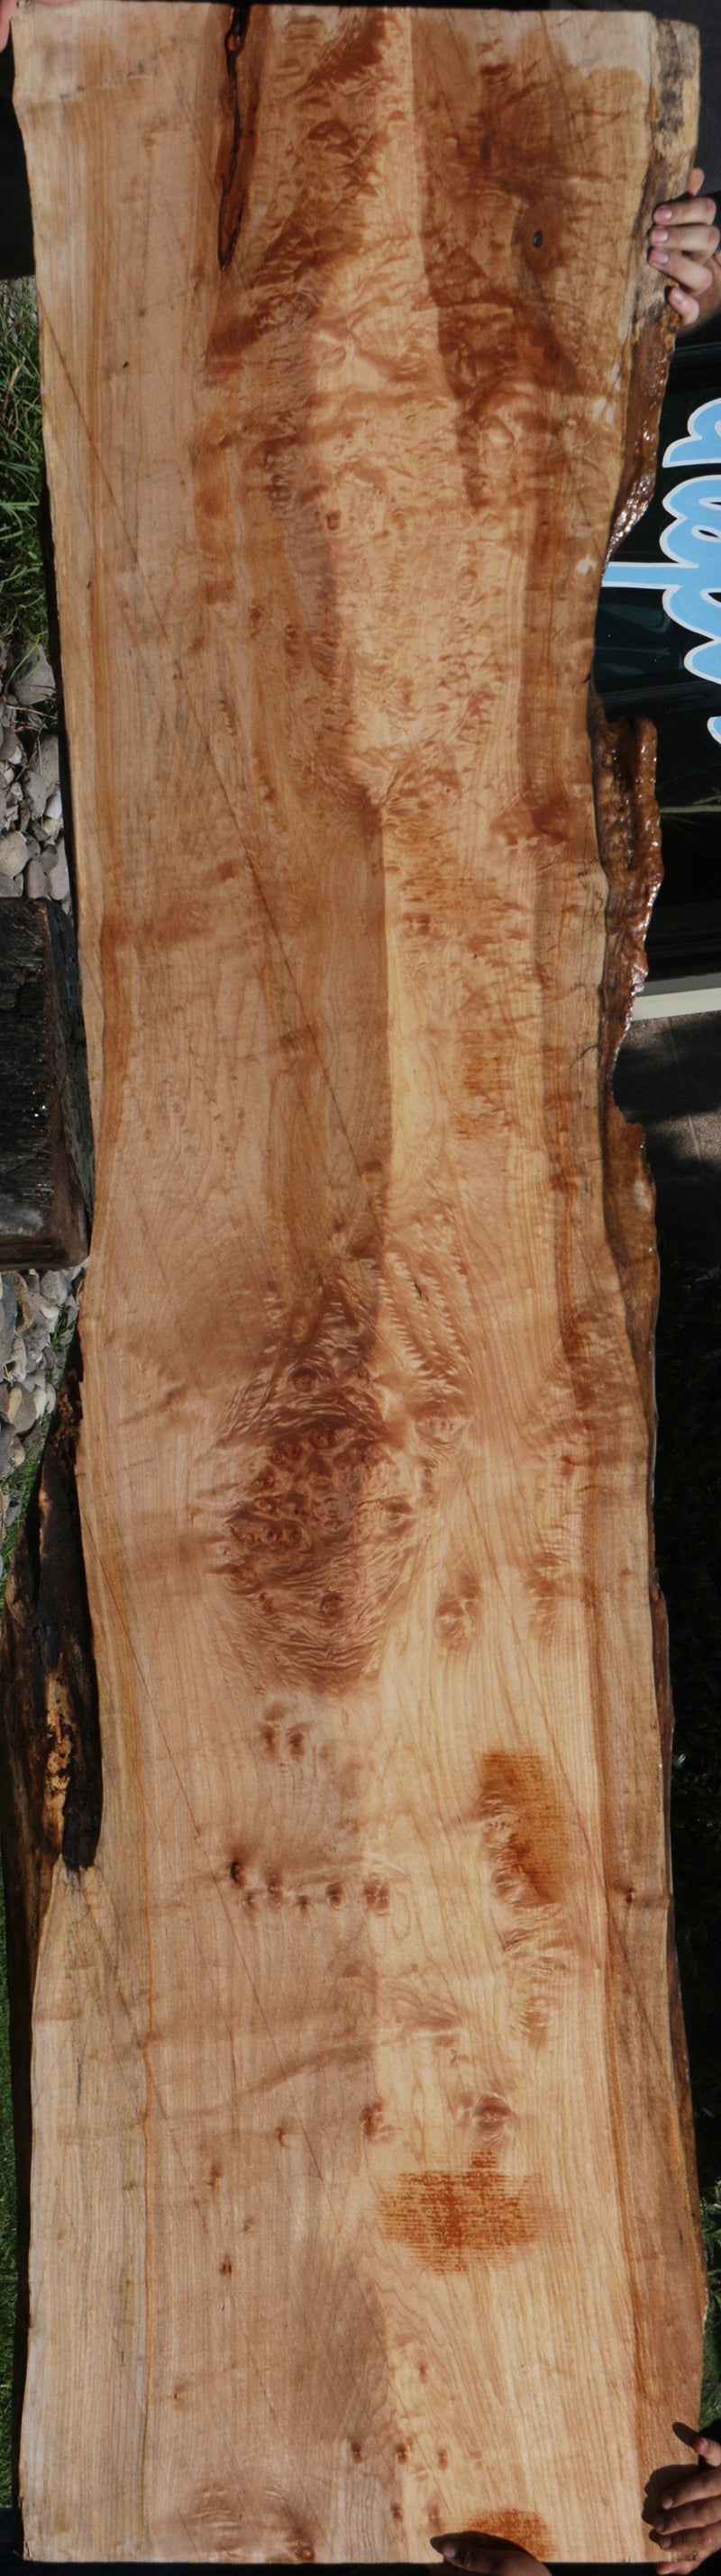 Quilted Maple Burl Live Edge Slab (Free Shipping Excluded)